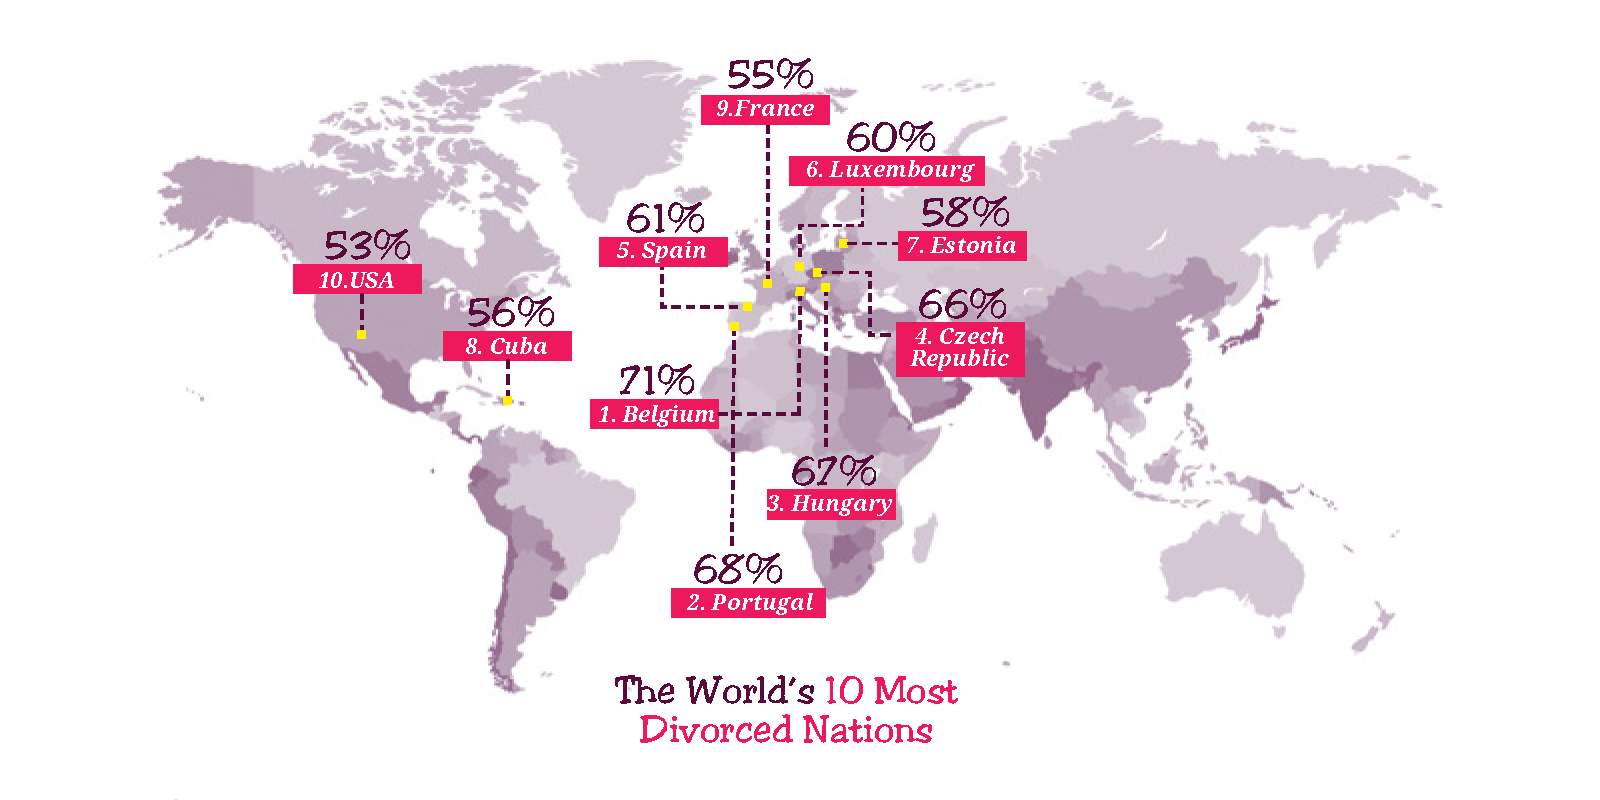 The 10 World's Most Divorced Nations